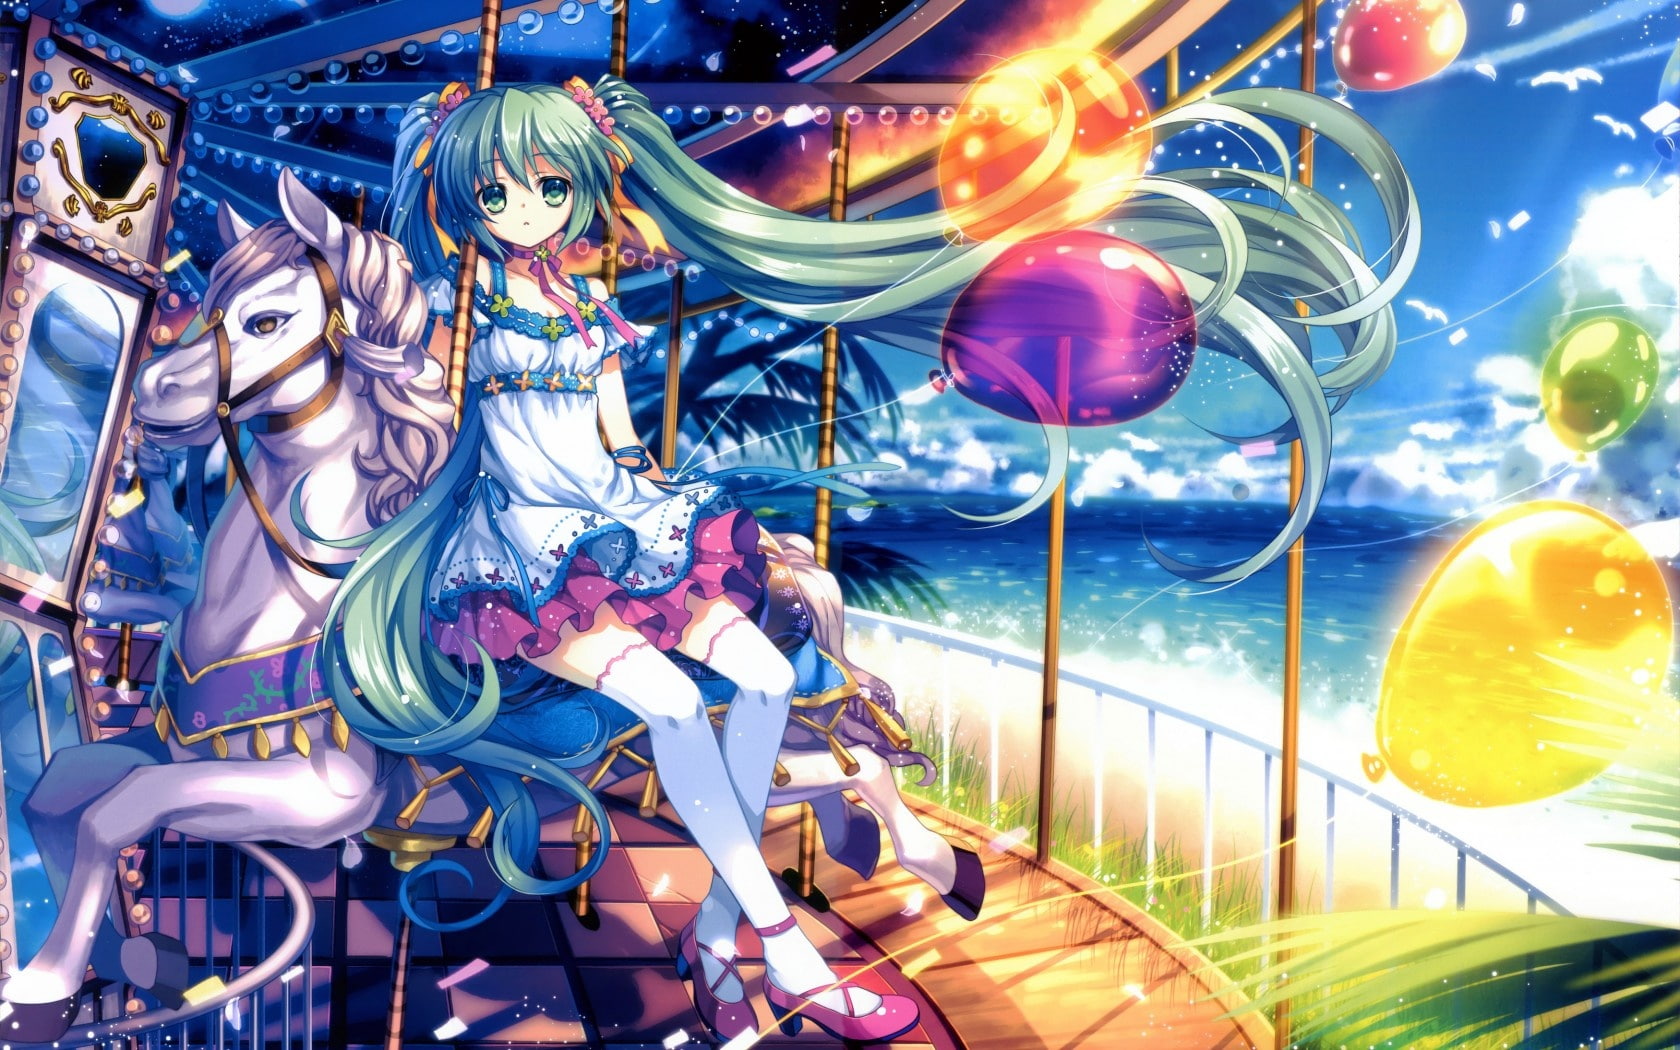 Green hair anime girl sitting on the merry-go-round